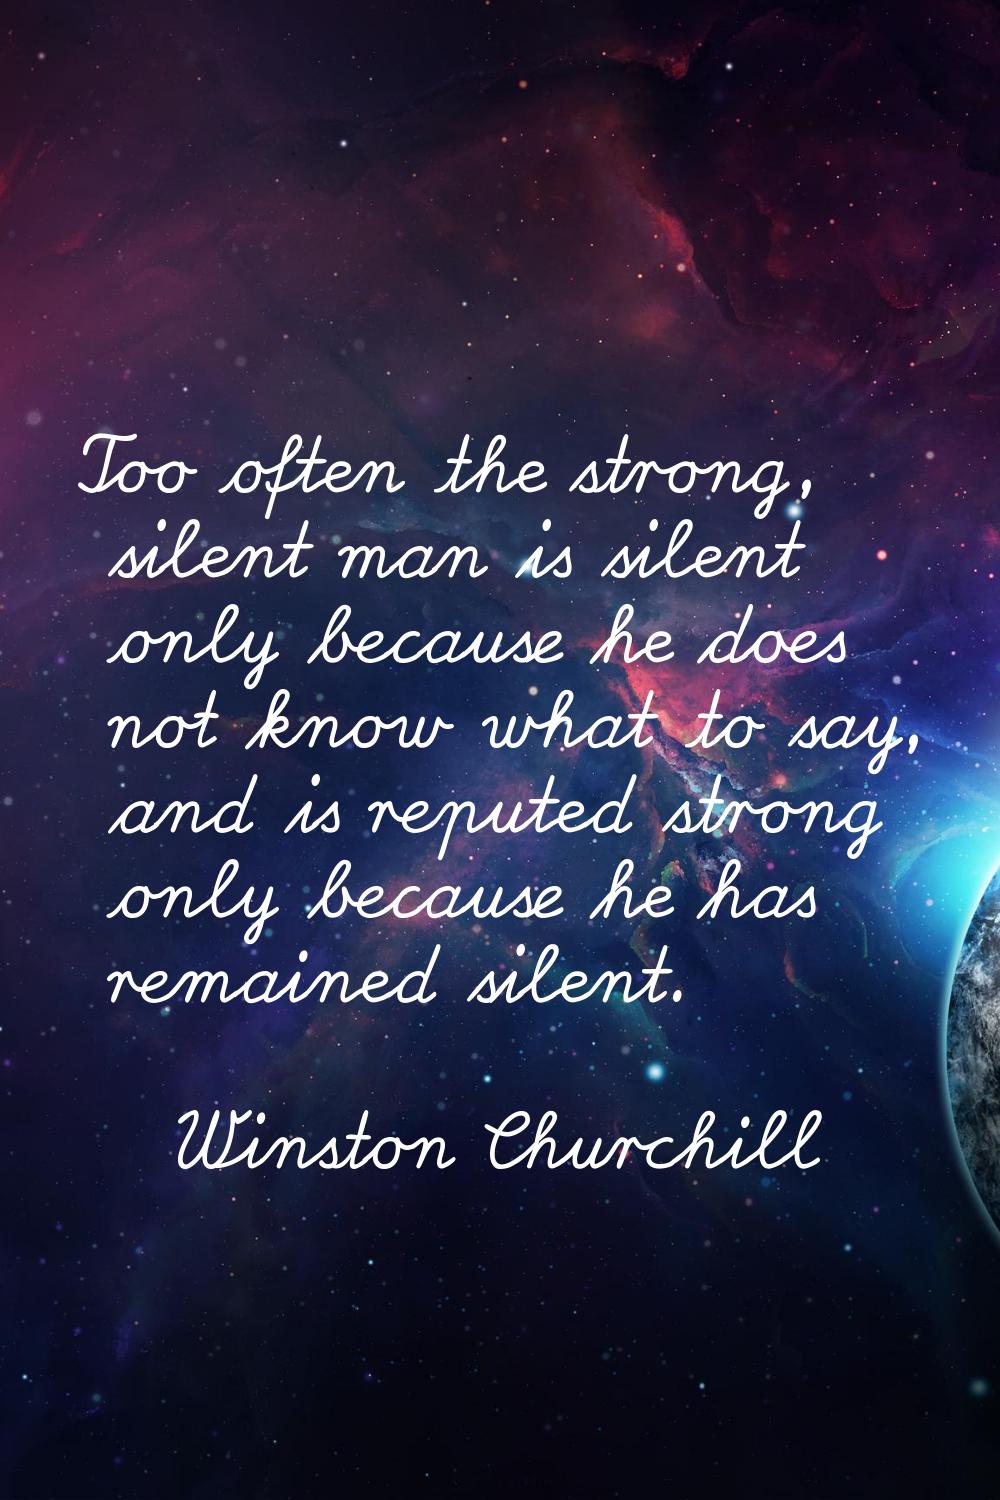 Too often the strong, silent man is silent only because he does not know what to say, and is repute